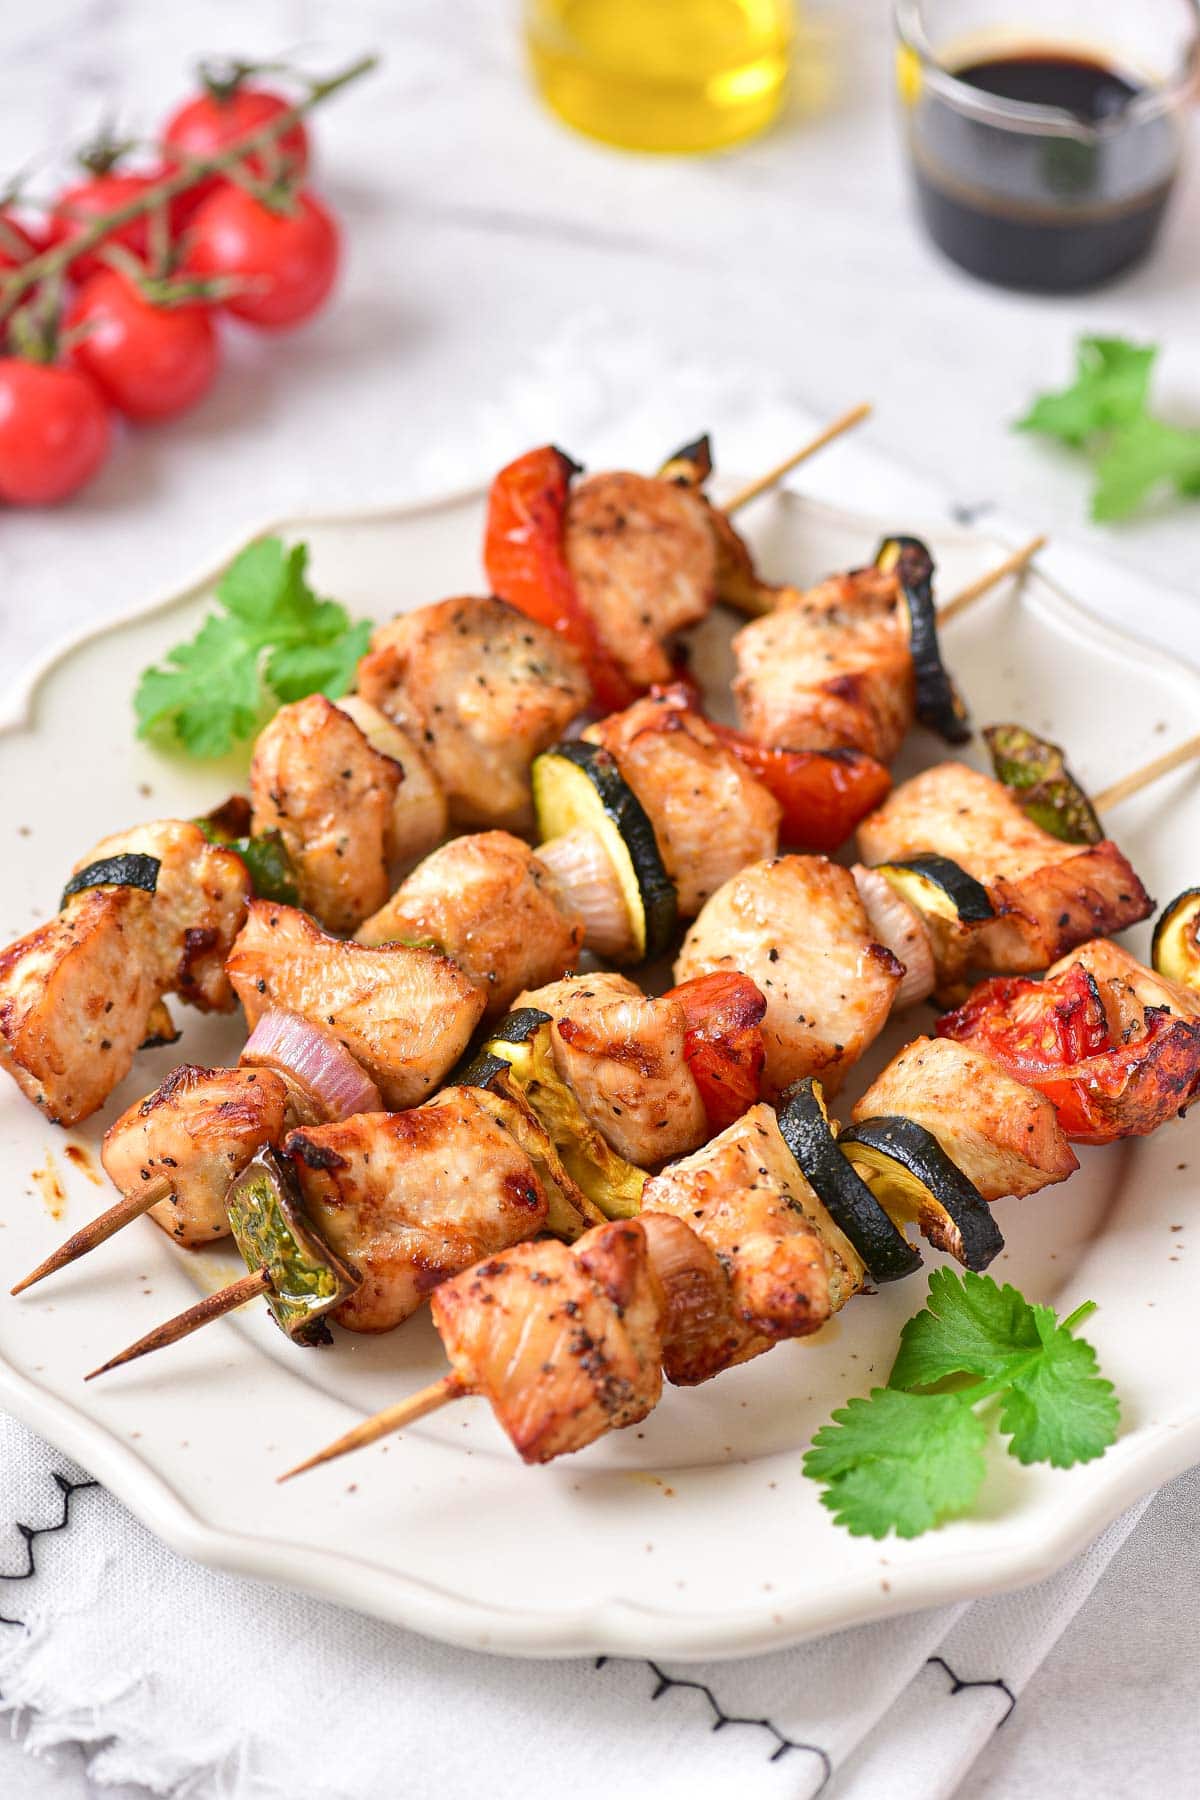 row of cooked chicken kabobs on white plate with green parsley around.